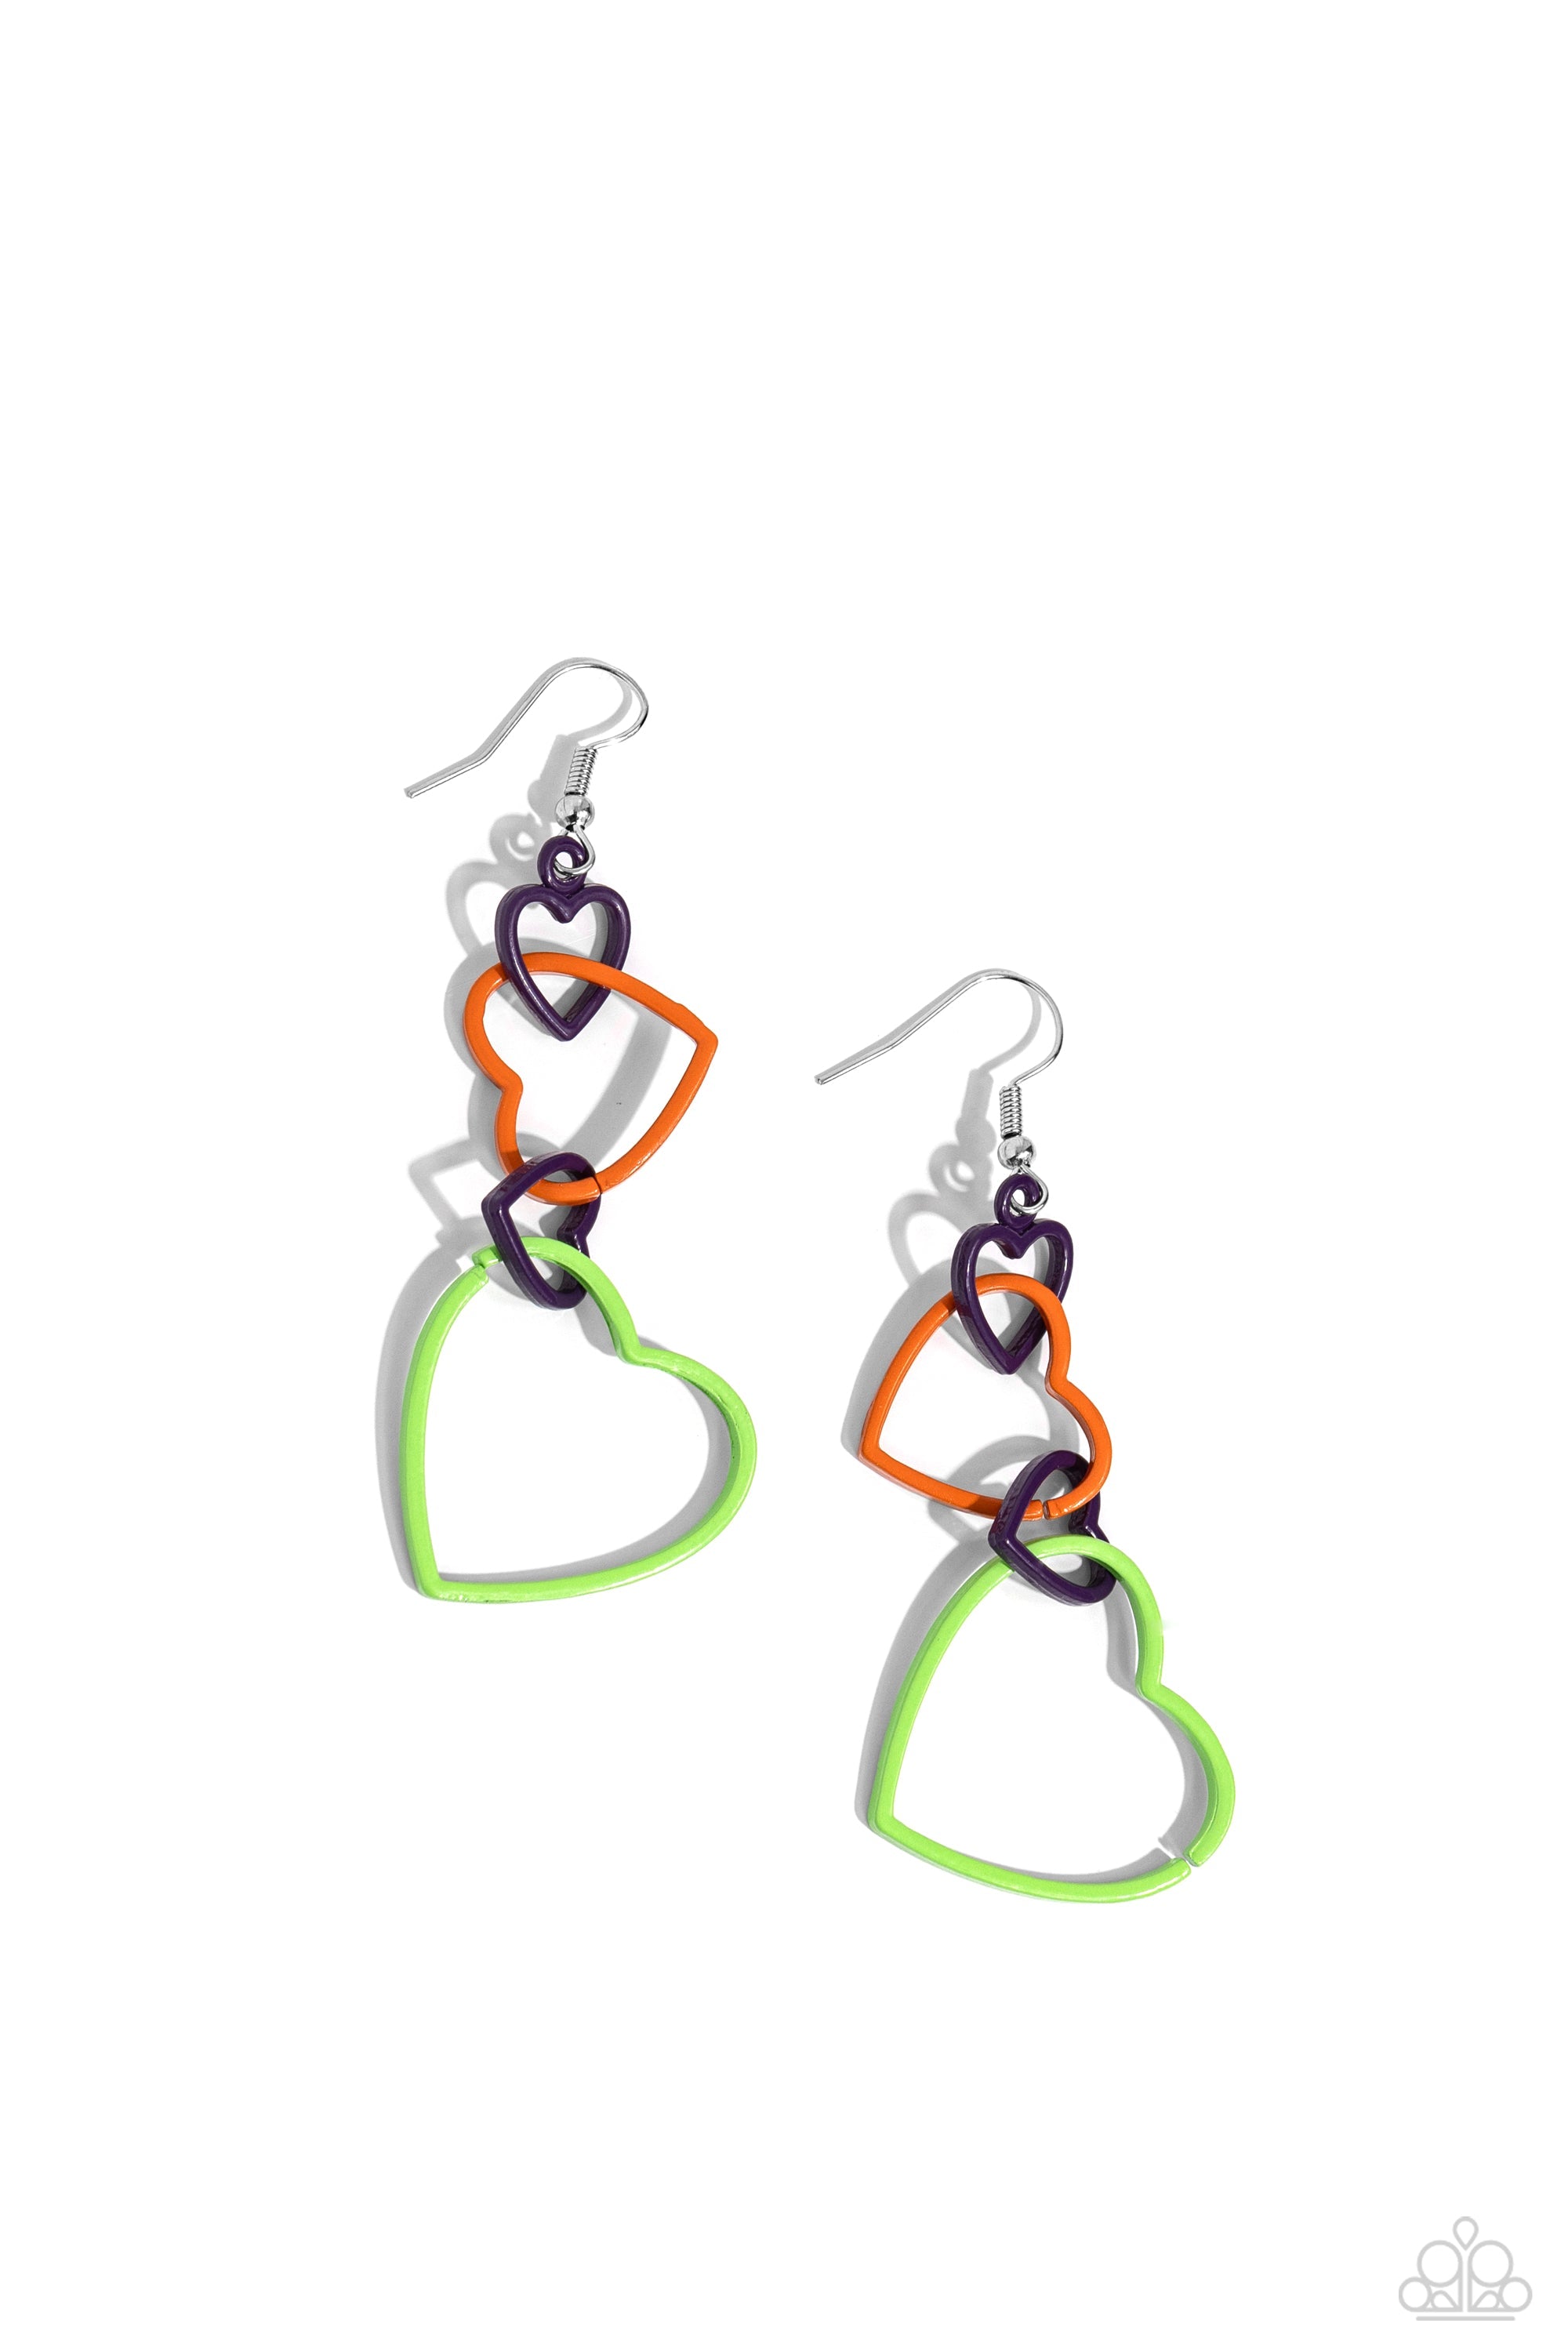 Cascading Crush Multi Heart Earrings - Paparazzi Accessories- lightbox - CarasShop.com - $5 Jewelry by Cara Jewels